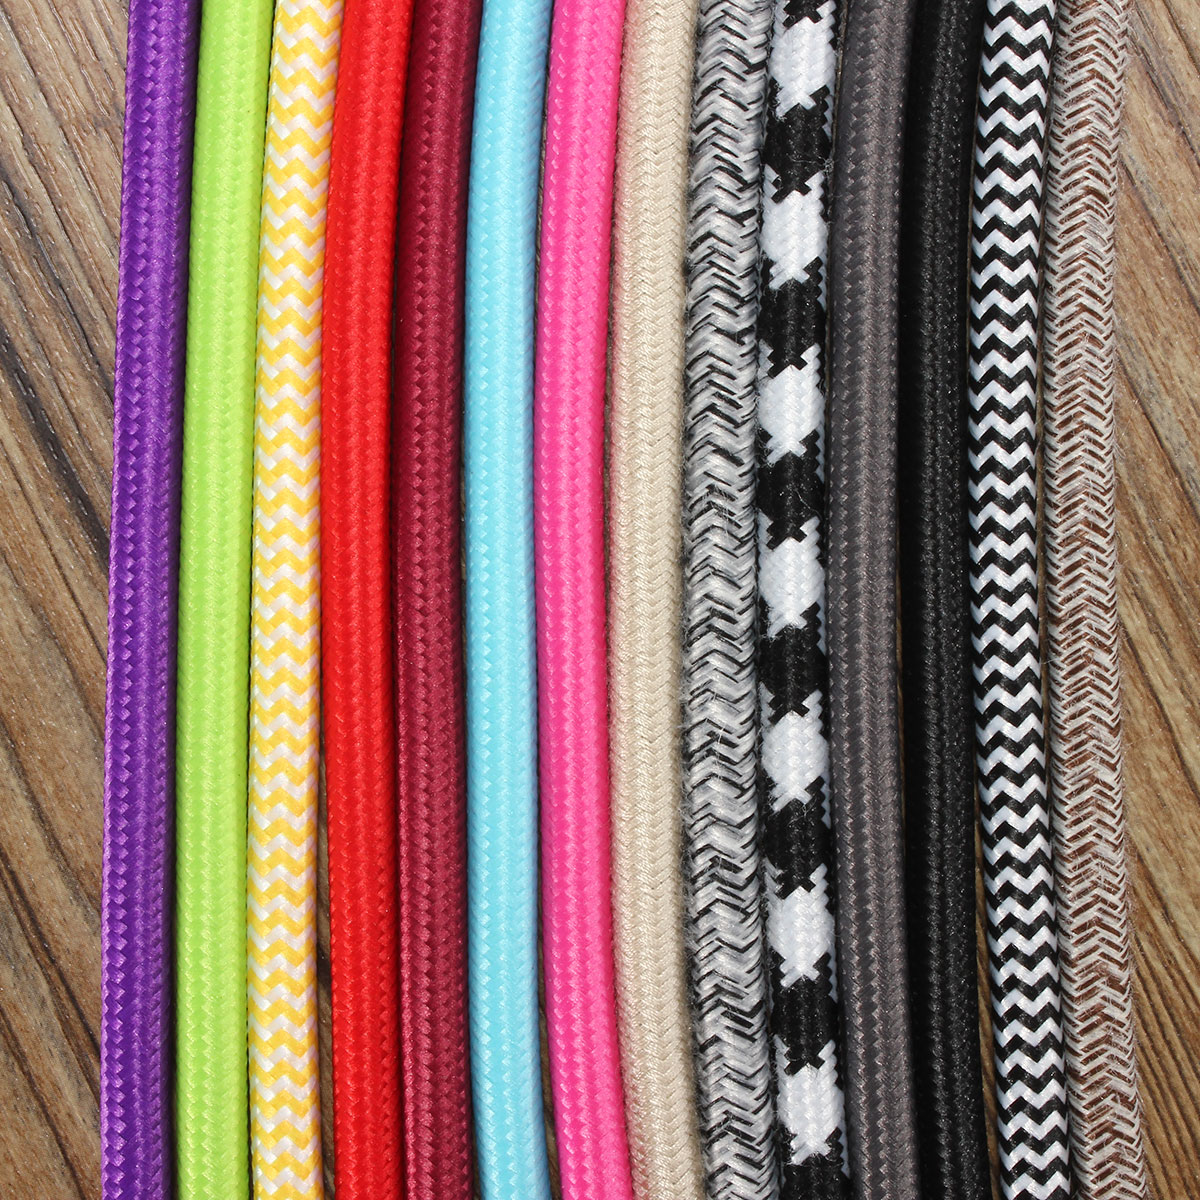 1M-2-Cord-Color-Vintage-Twist-Braided-Fabric-Light-Cable-Electric-Wire-1069141-2